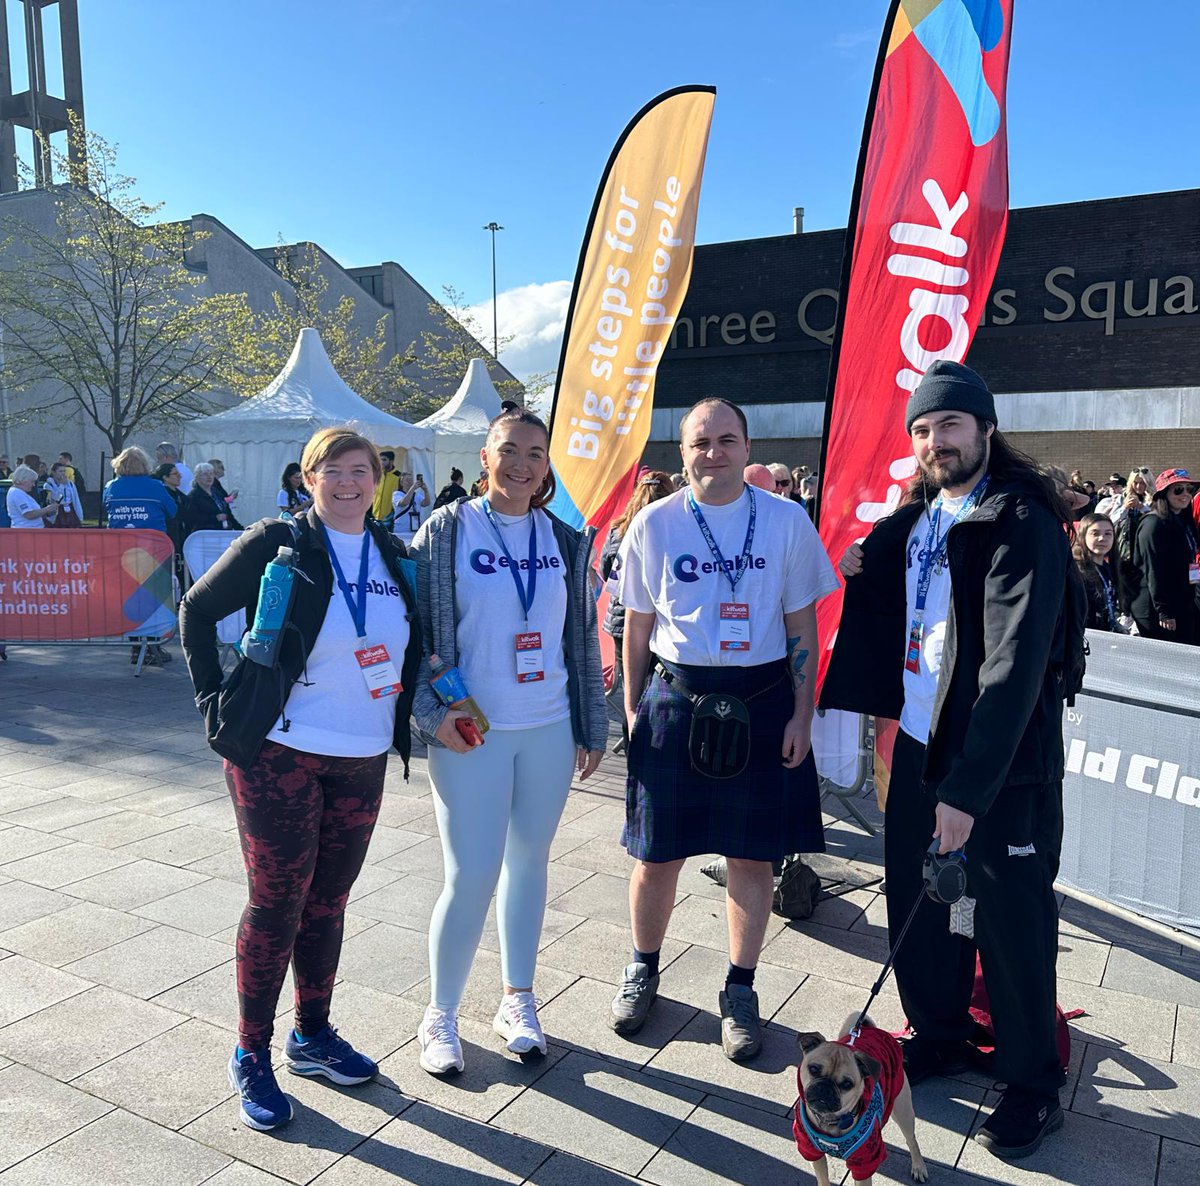 Our first @Enable_Tweets Big Strollers leaving #Clydebank are members of the Enable Communities team and their friends and family. @EmilyEnable and Craig are joined by Emily's Mum and Craig's brother at the #Glasgow @thekiltwalk